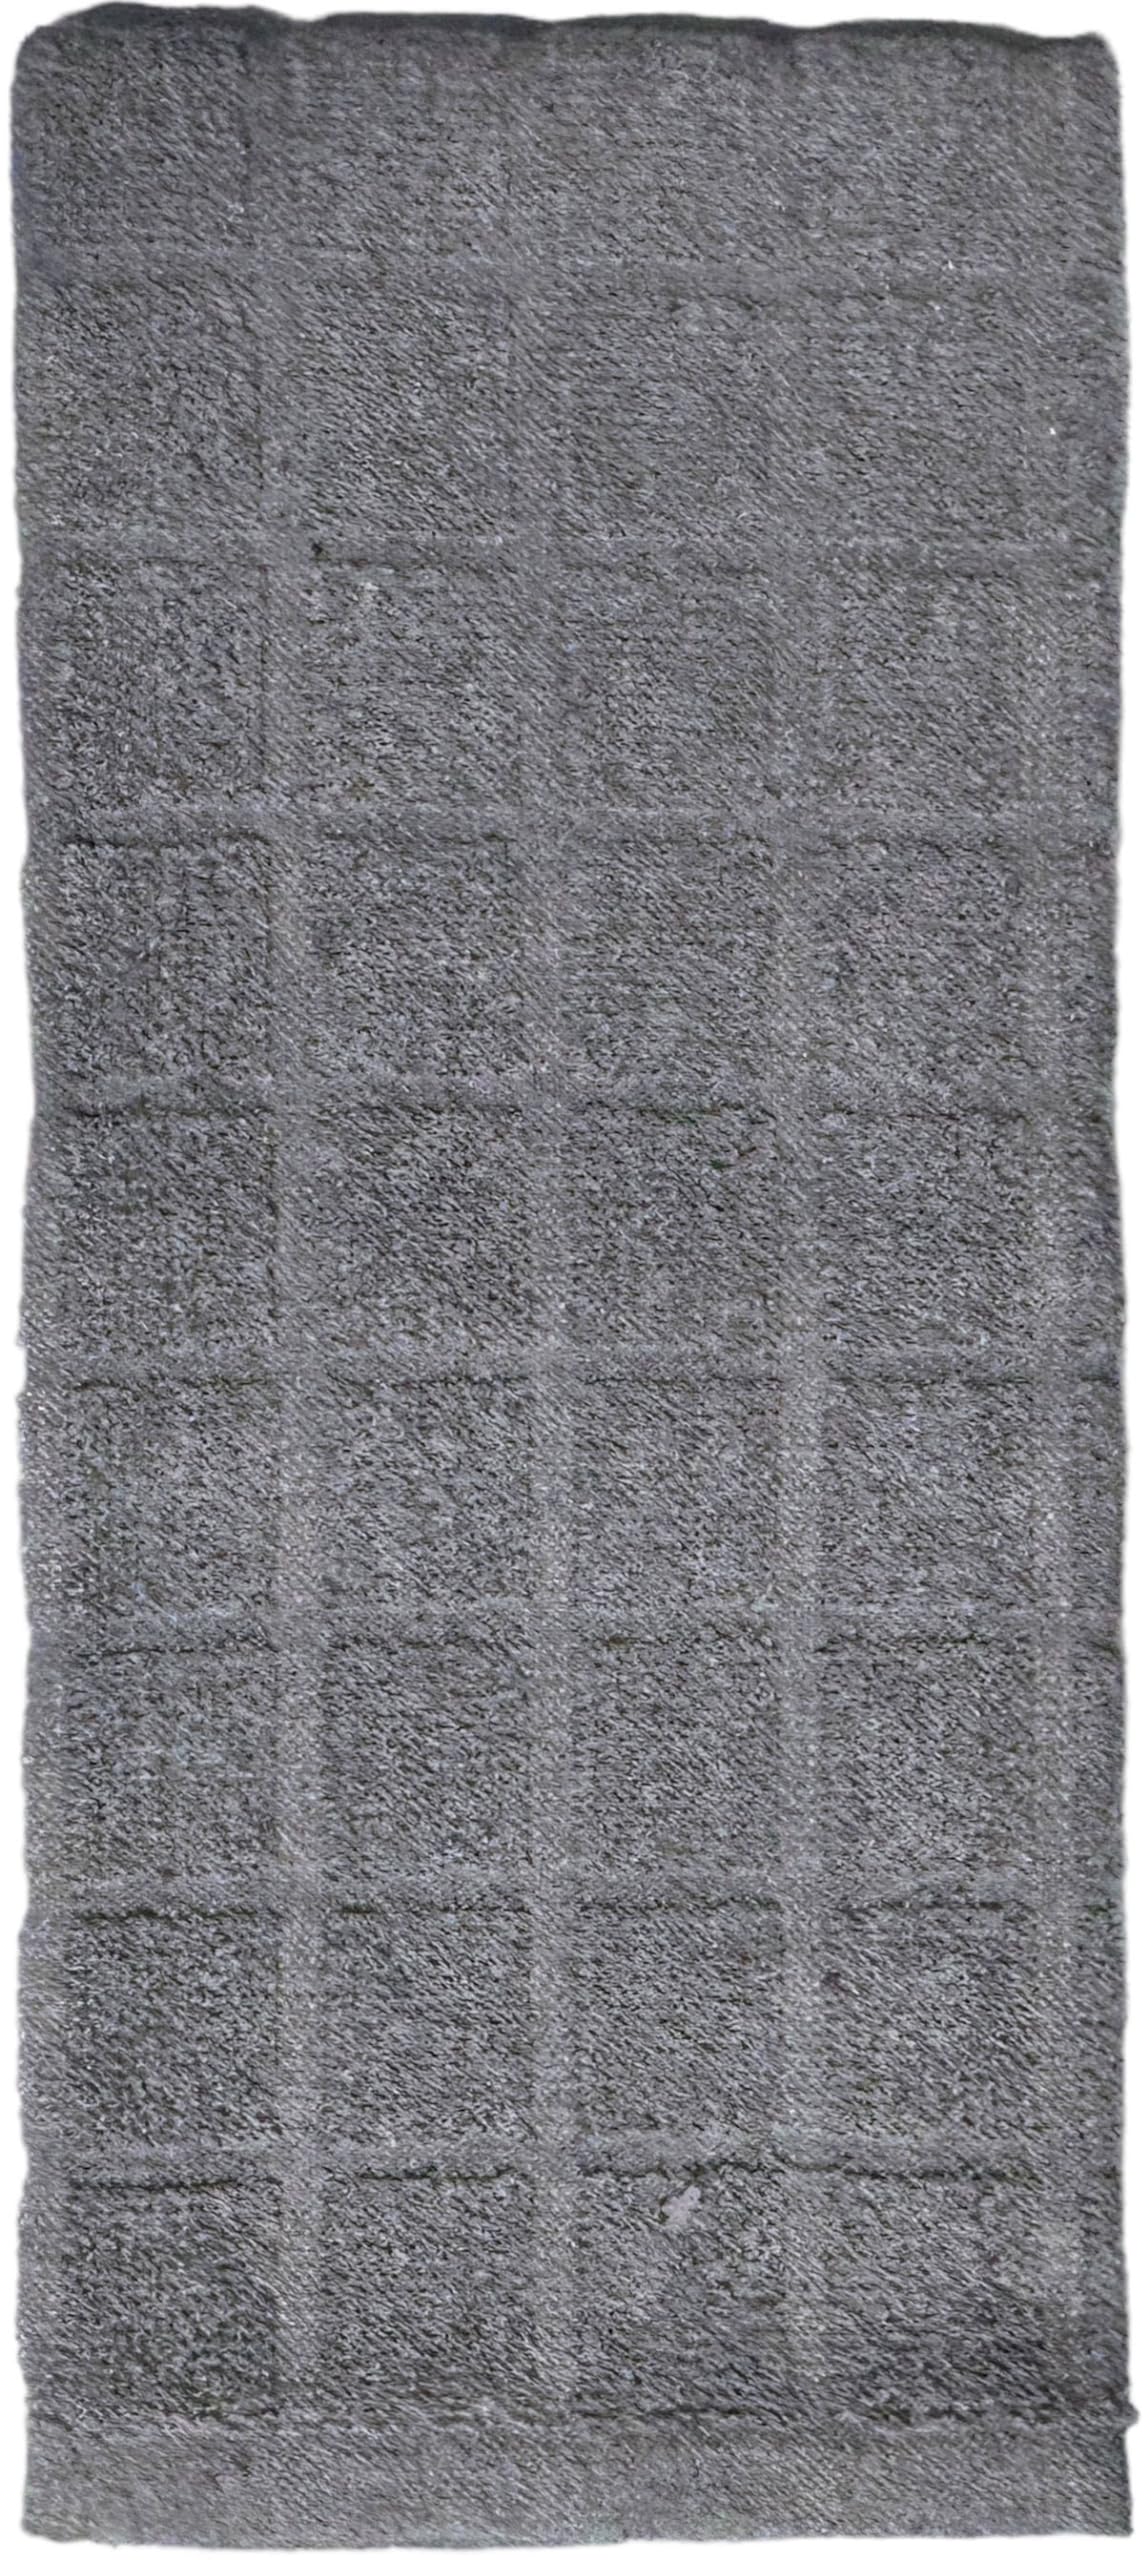 Set of 8, 100% Cotton Grey Window Panel Terry Kitchen Towel - 4 Kitchen Towels Size: 15 x 25 inch and 4 Dishcloths Size: 12 x 12 inch, Ultra Absorbent, Maximum Softness and Machine Washable.